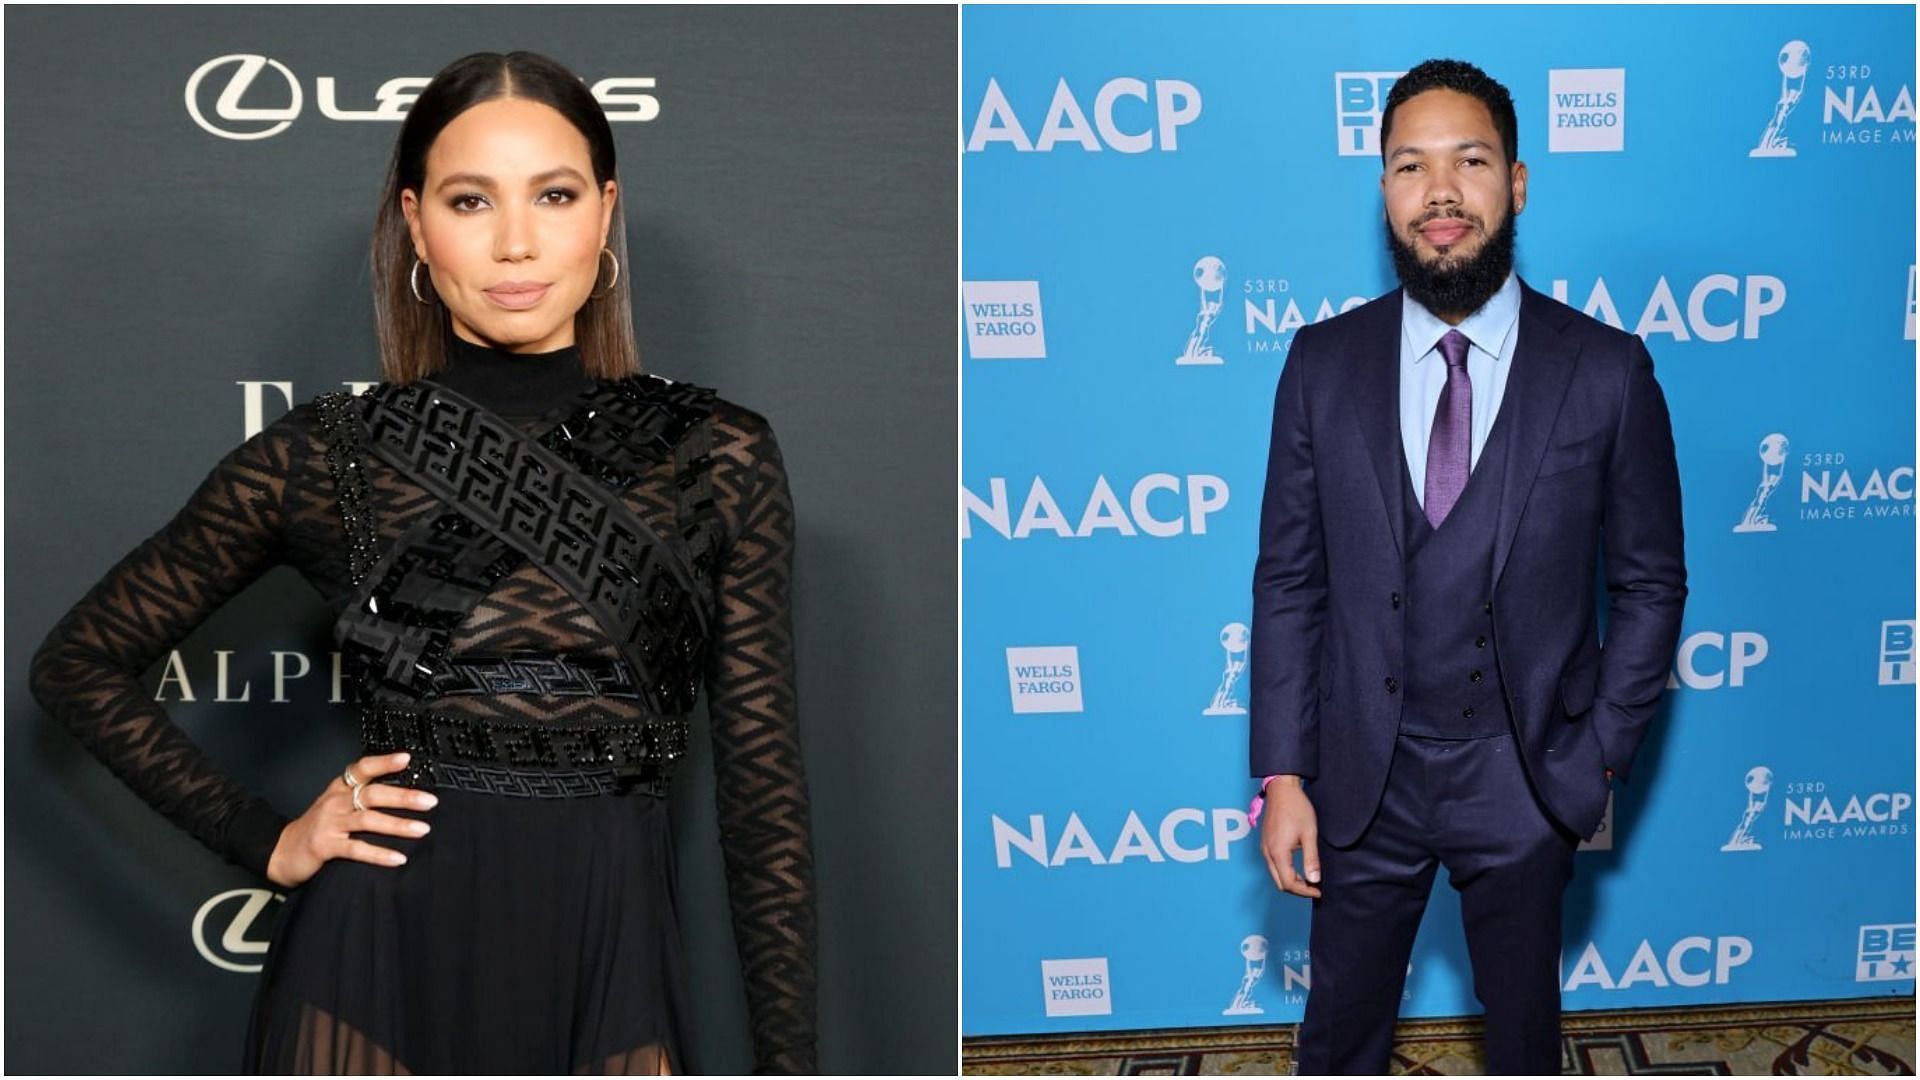 Jurnee Smollett and Jocqui Smollett have claimed that their brother is innocent (Images via Amy Sussman and Matt Winkelmeyer/Getty Images)